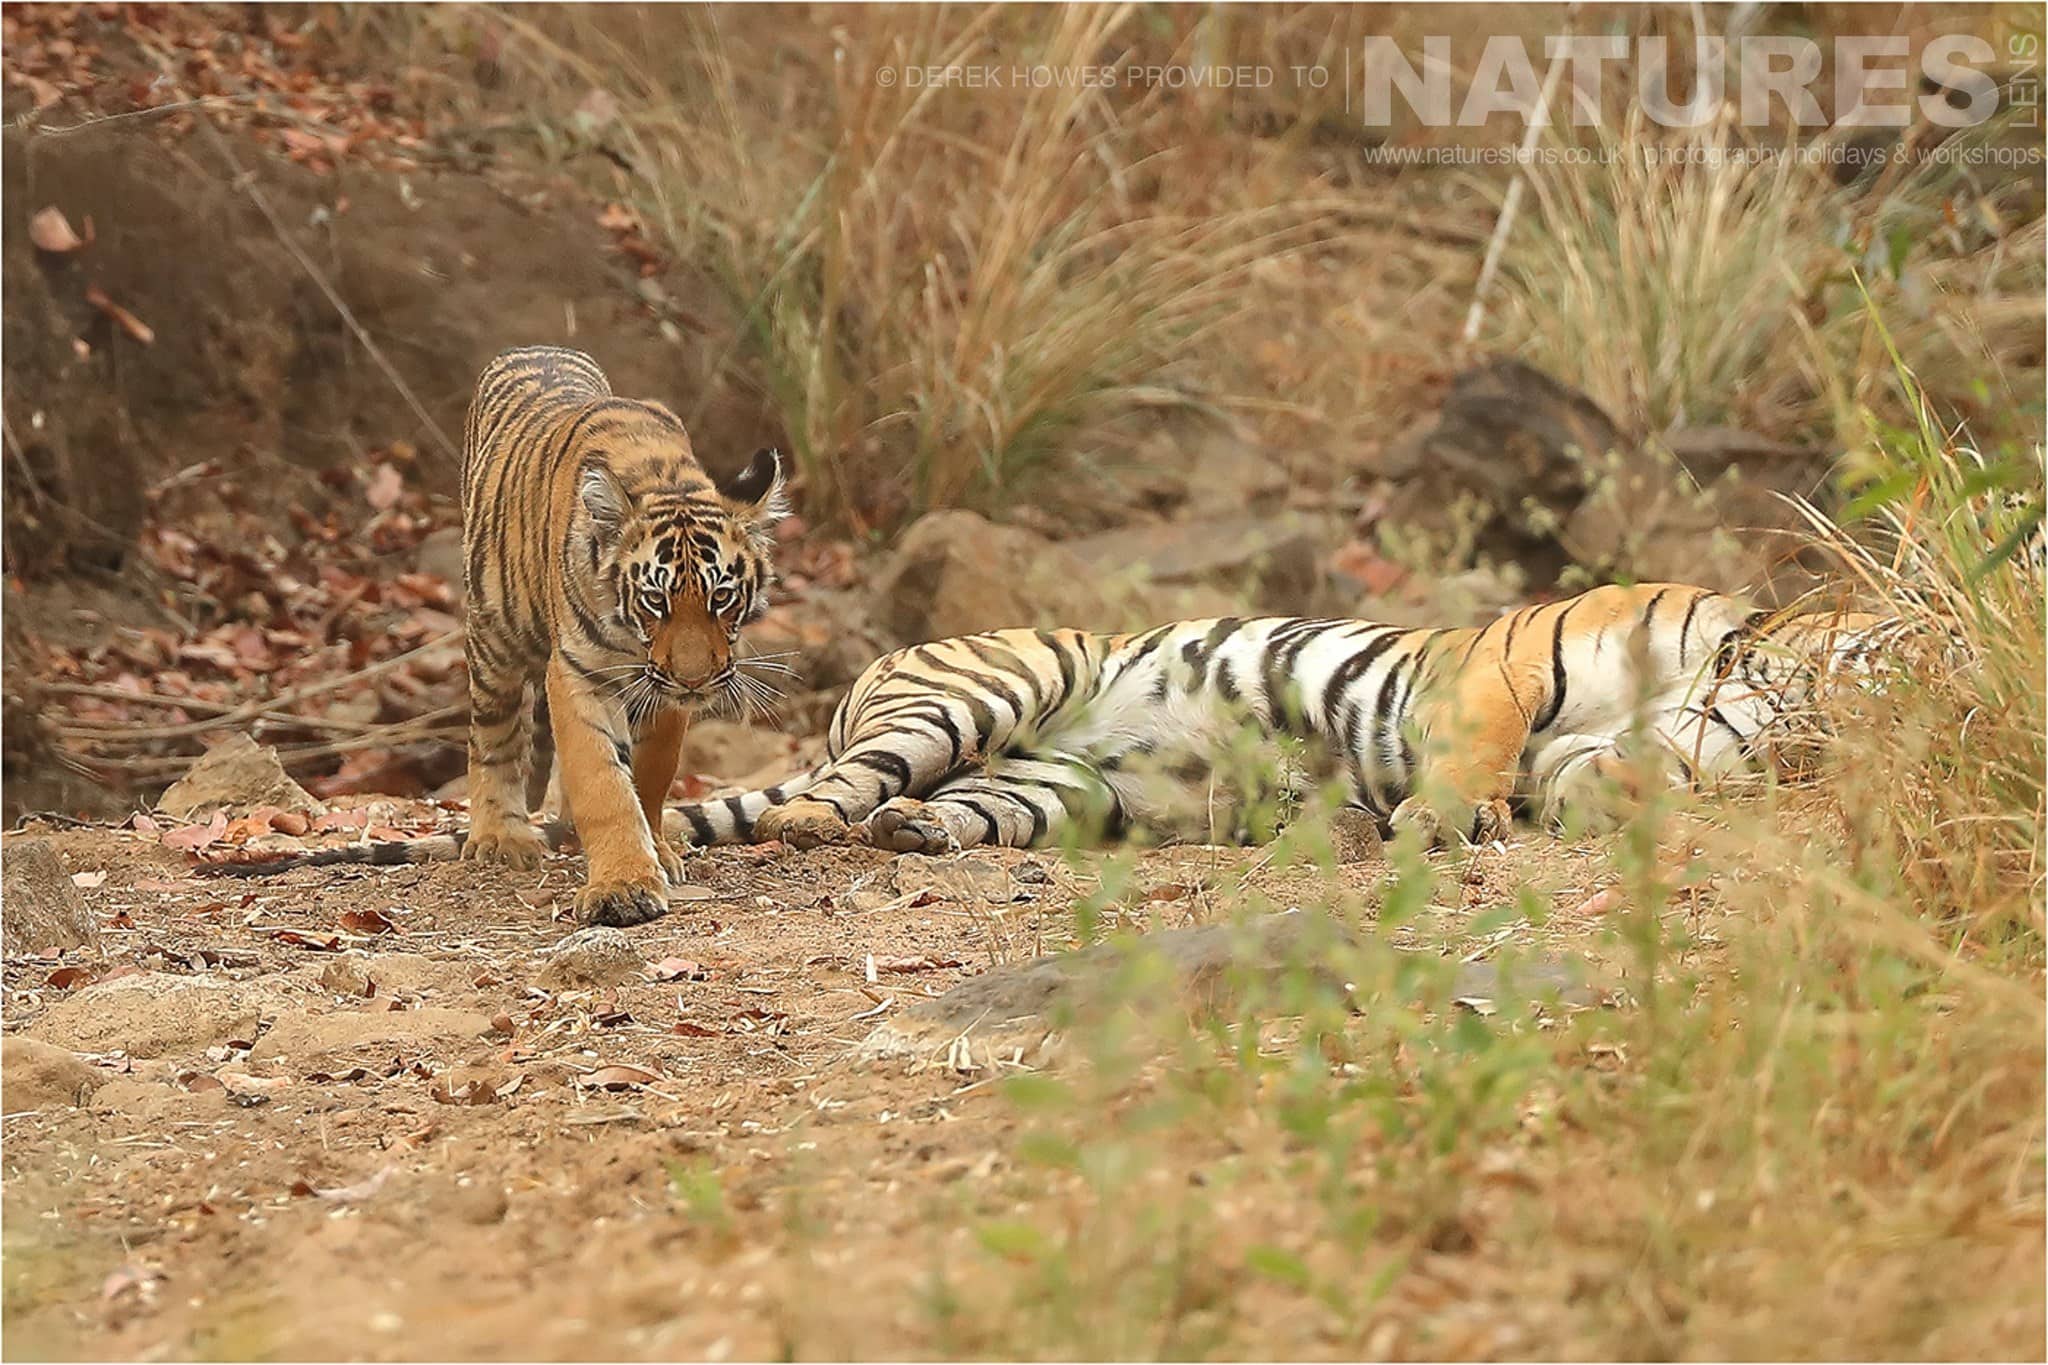 tiger cub looking fierce as his mother rests an image captured during a natureslens bengal tigers of tadoba photography holiday